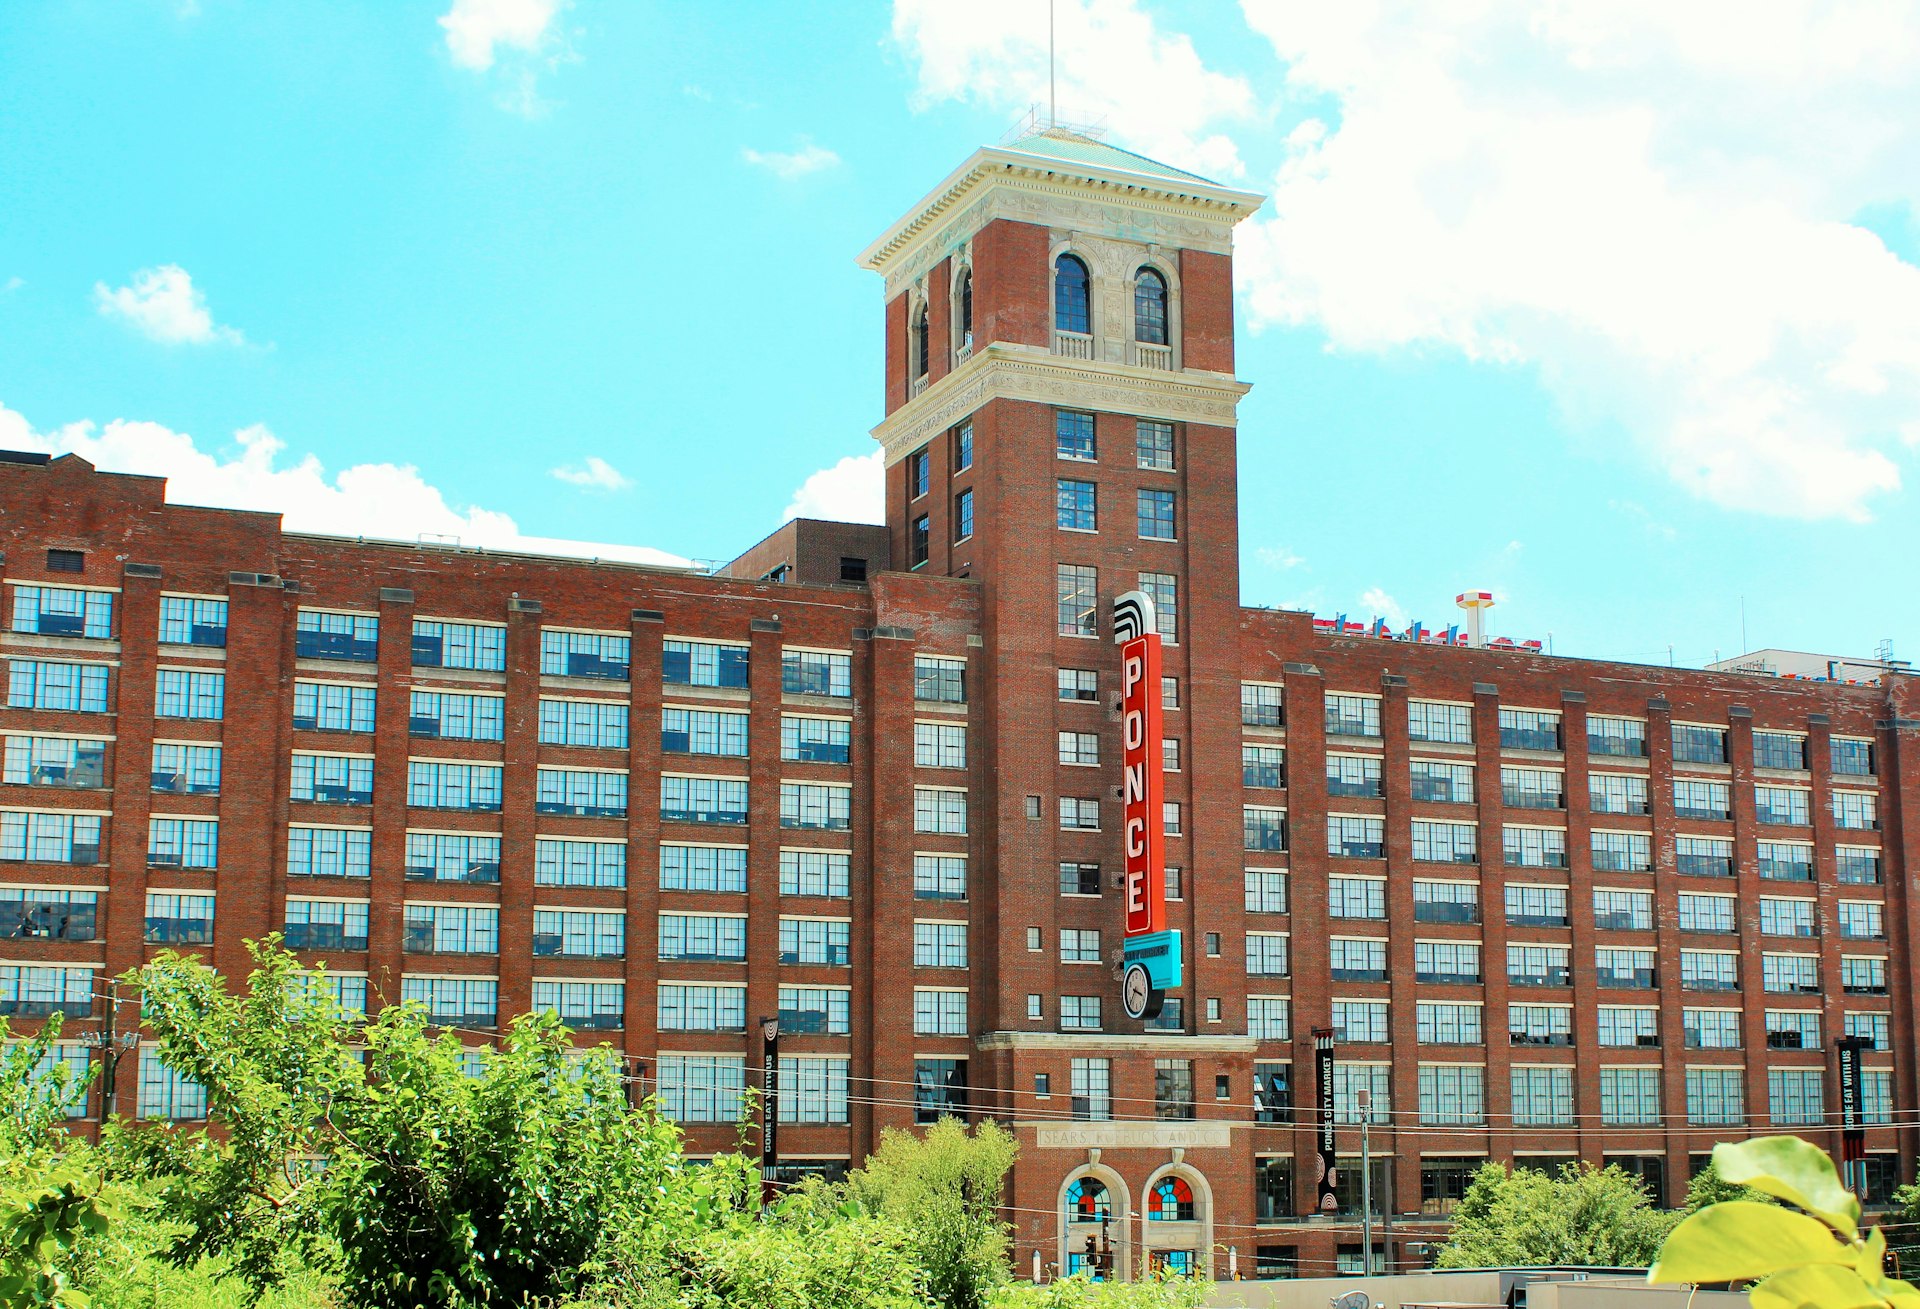 The exterior of Ponce City Market in Atlanta